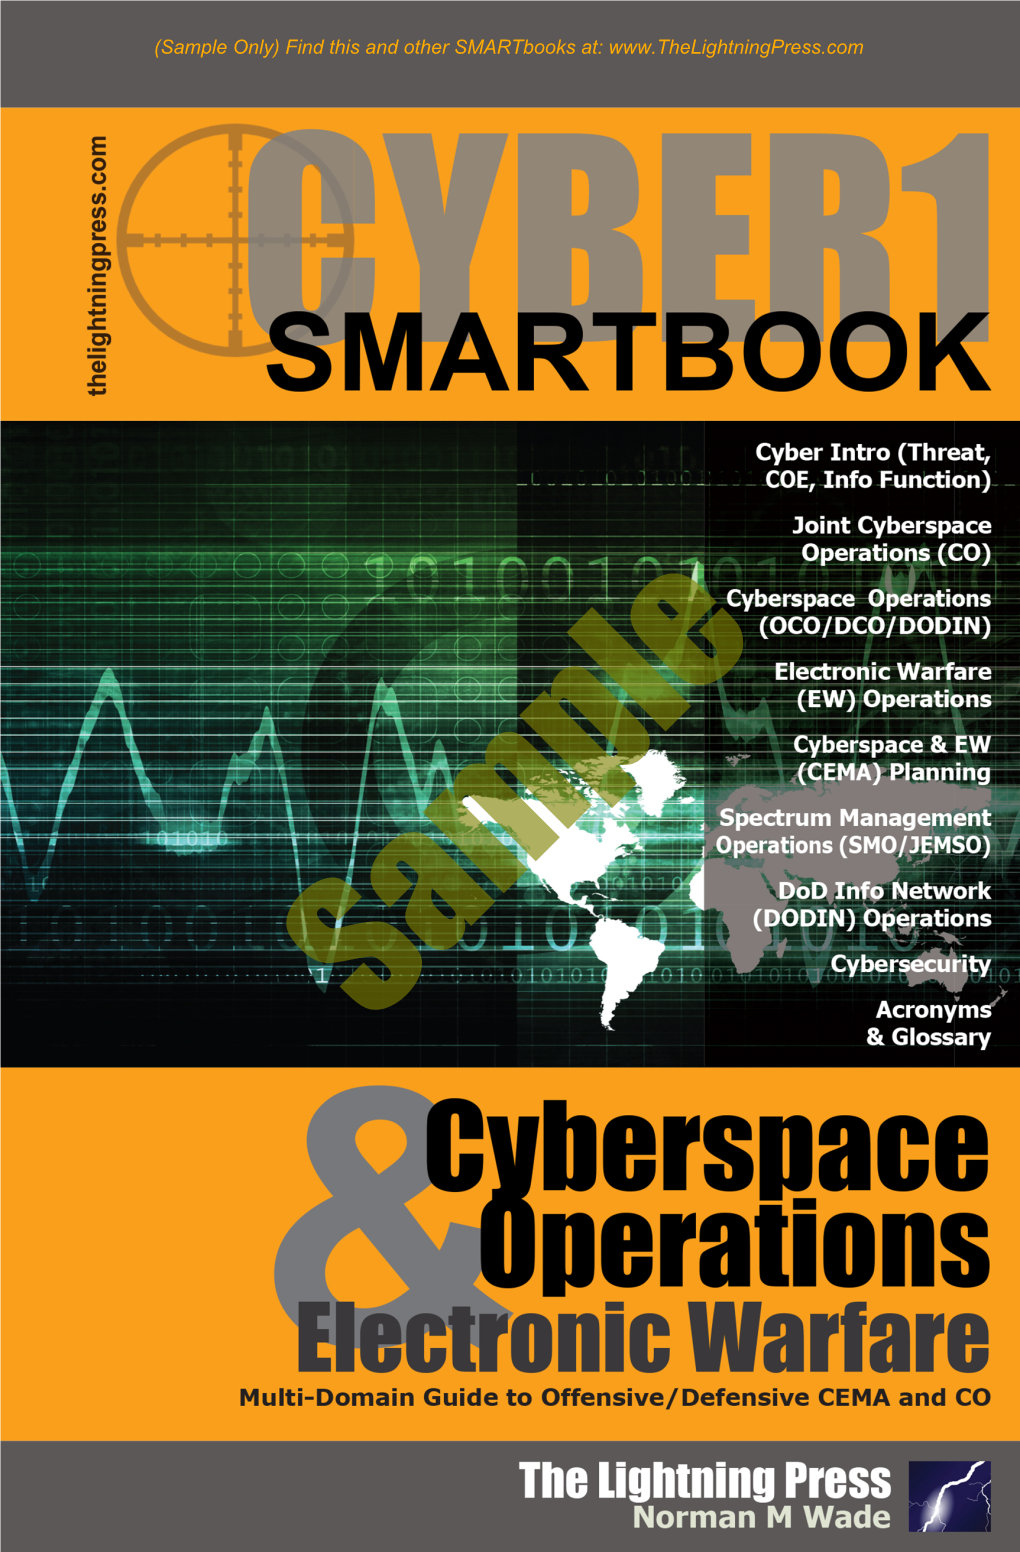 (CYBER1) the Cyberspace Operations & Electronic Warfare